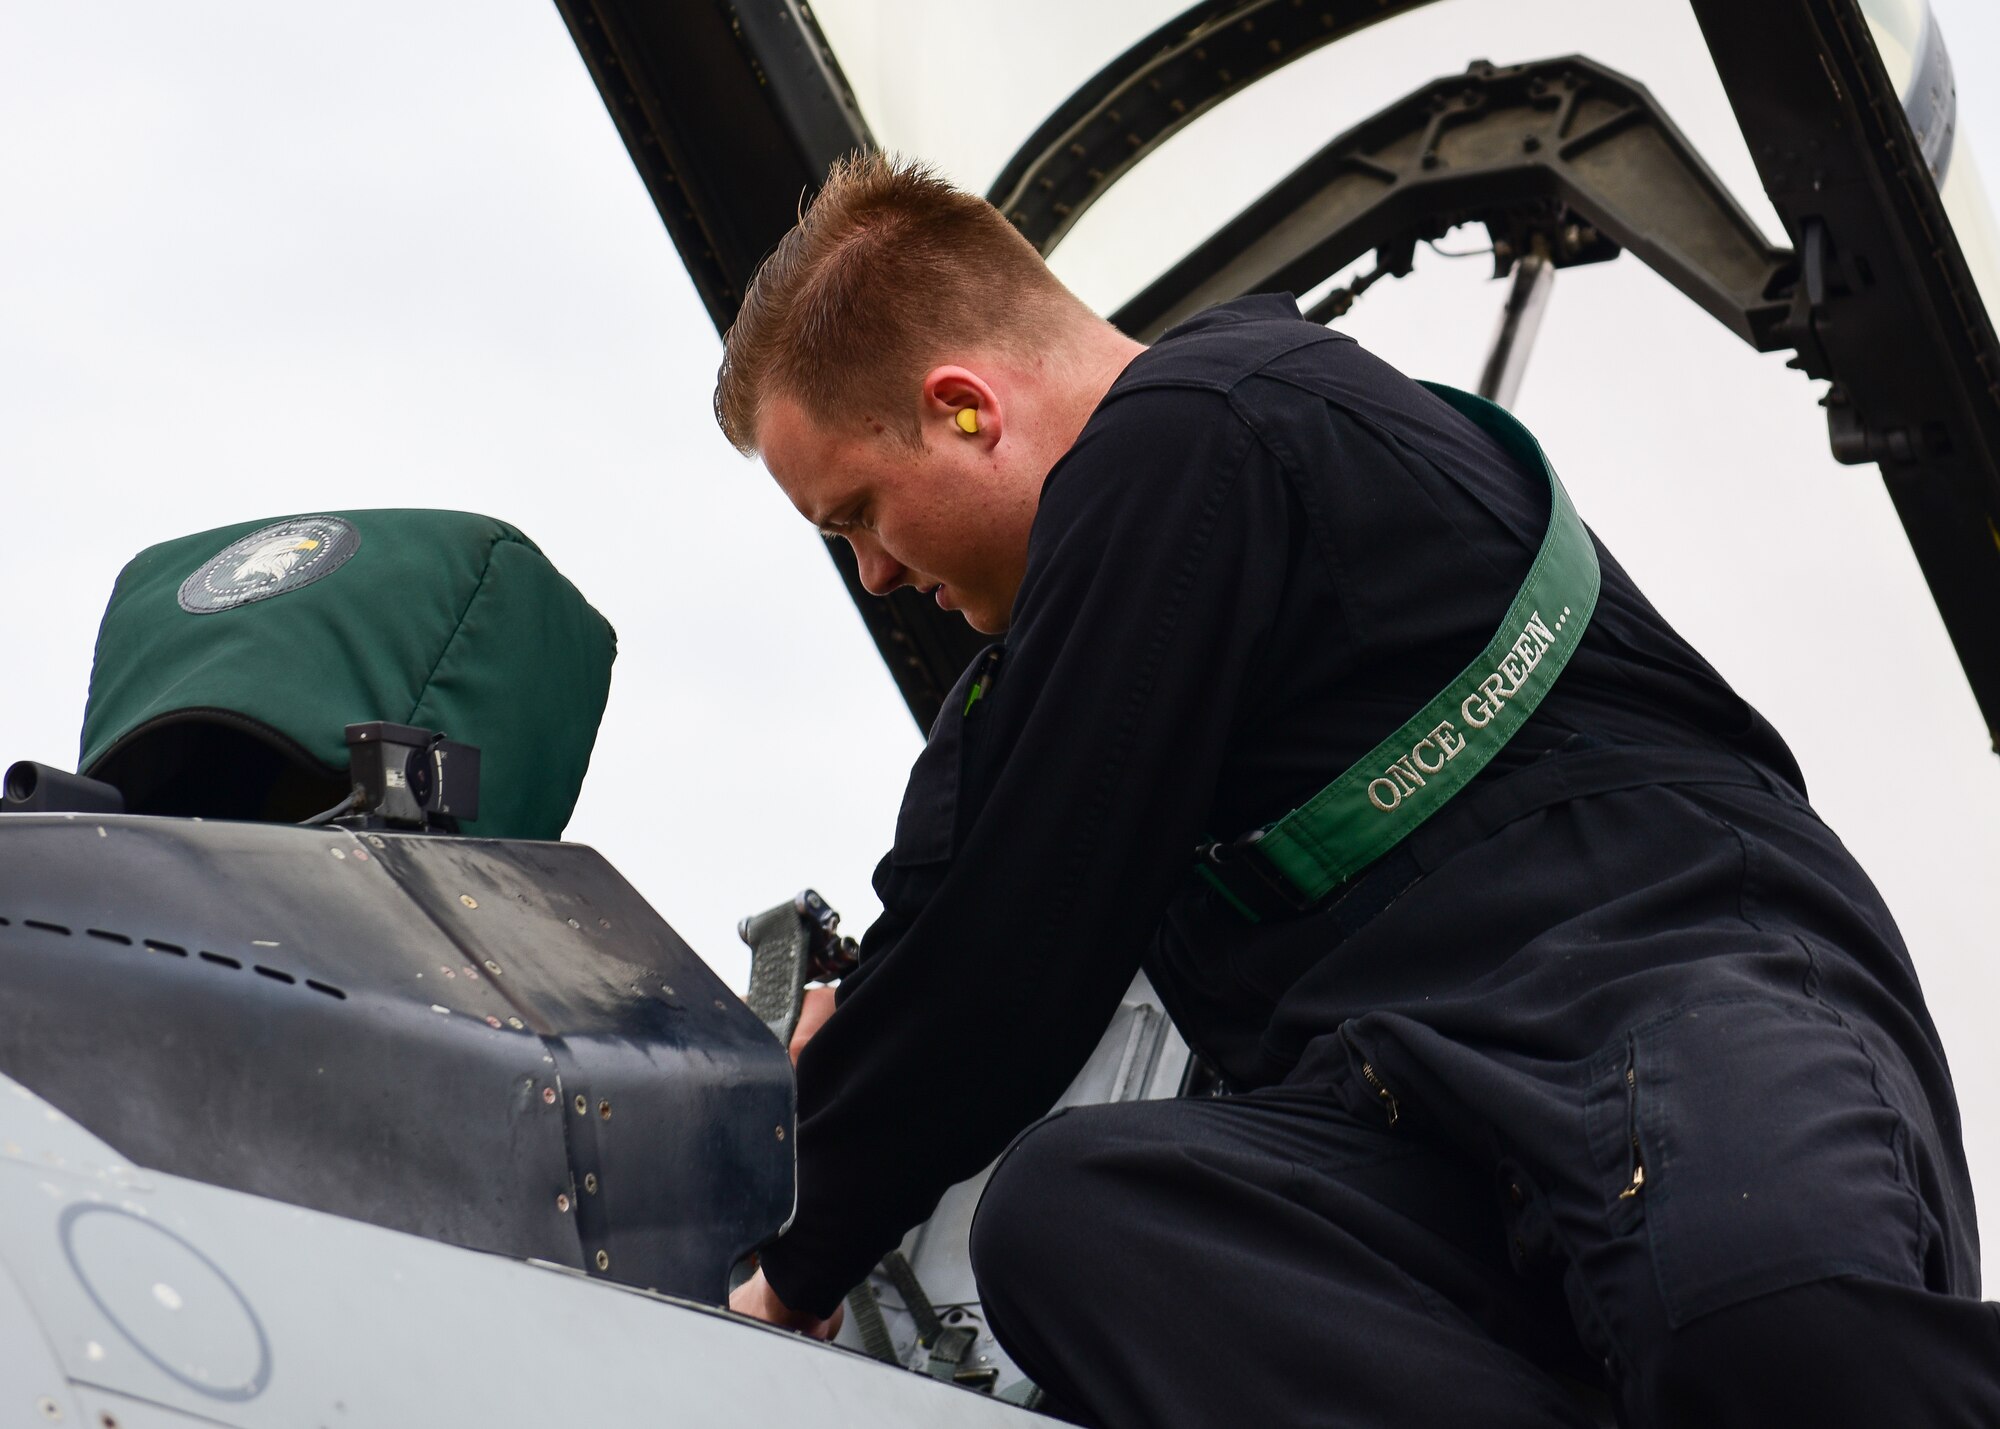 Senior Airman William Howell, 555th Fighter Generation Squadron crew chief from the 31st Fighter Wing, Aviano Air Base, Italy, services the cockpit of a F-16C Fighting Falcon after a flight during pre-exercise training for Cobra Warrior 2022